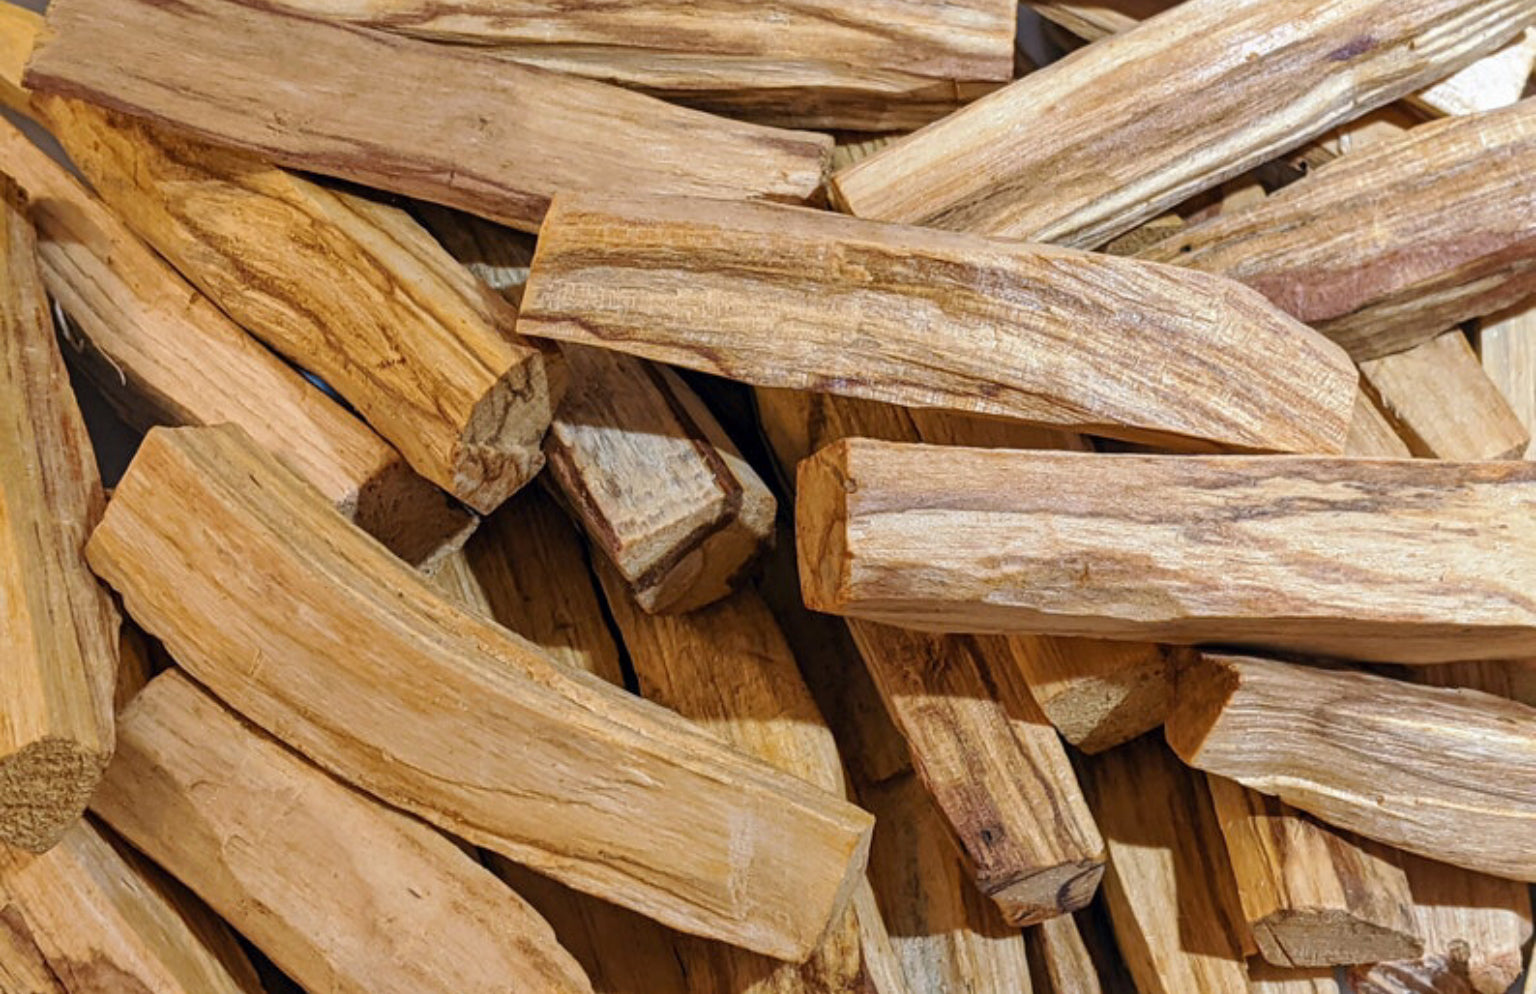 Palo Santo - 100% Natural - 5, 10, 15, 20 Sticks - Sustainably Harvested - High Resin Content